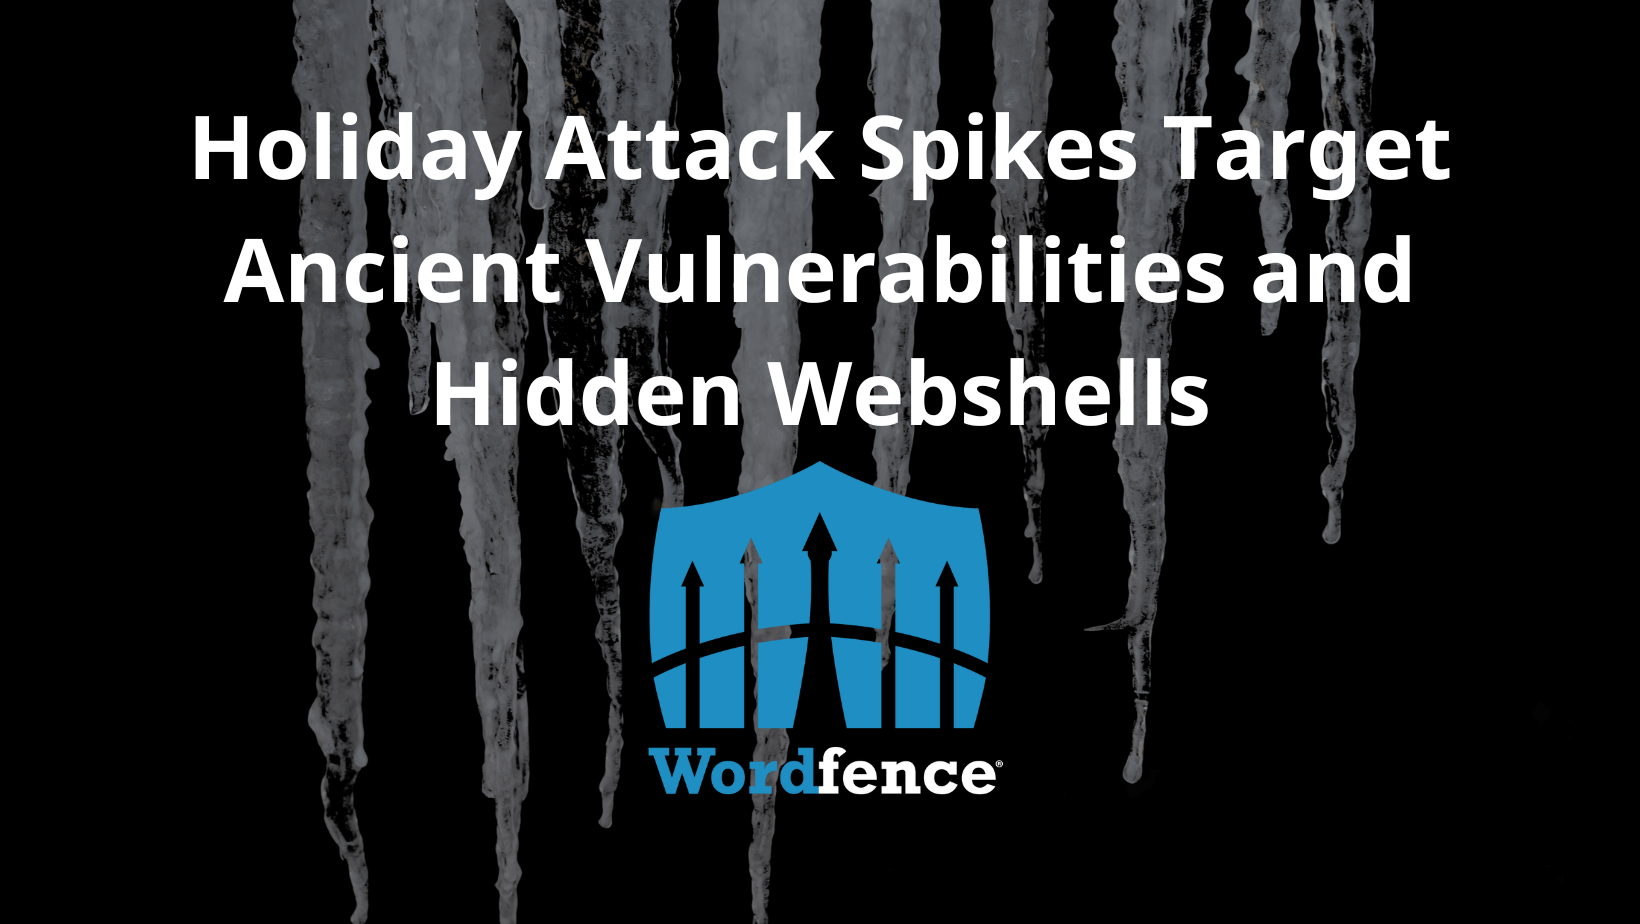 featured image of icicles on black background with the text Holiday Attack Spikes Target Ancient Vulnerabilities and Hidden Webshells